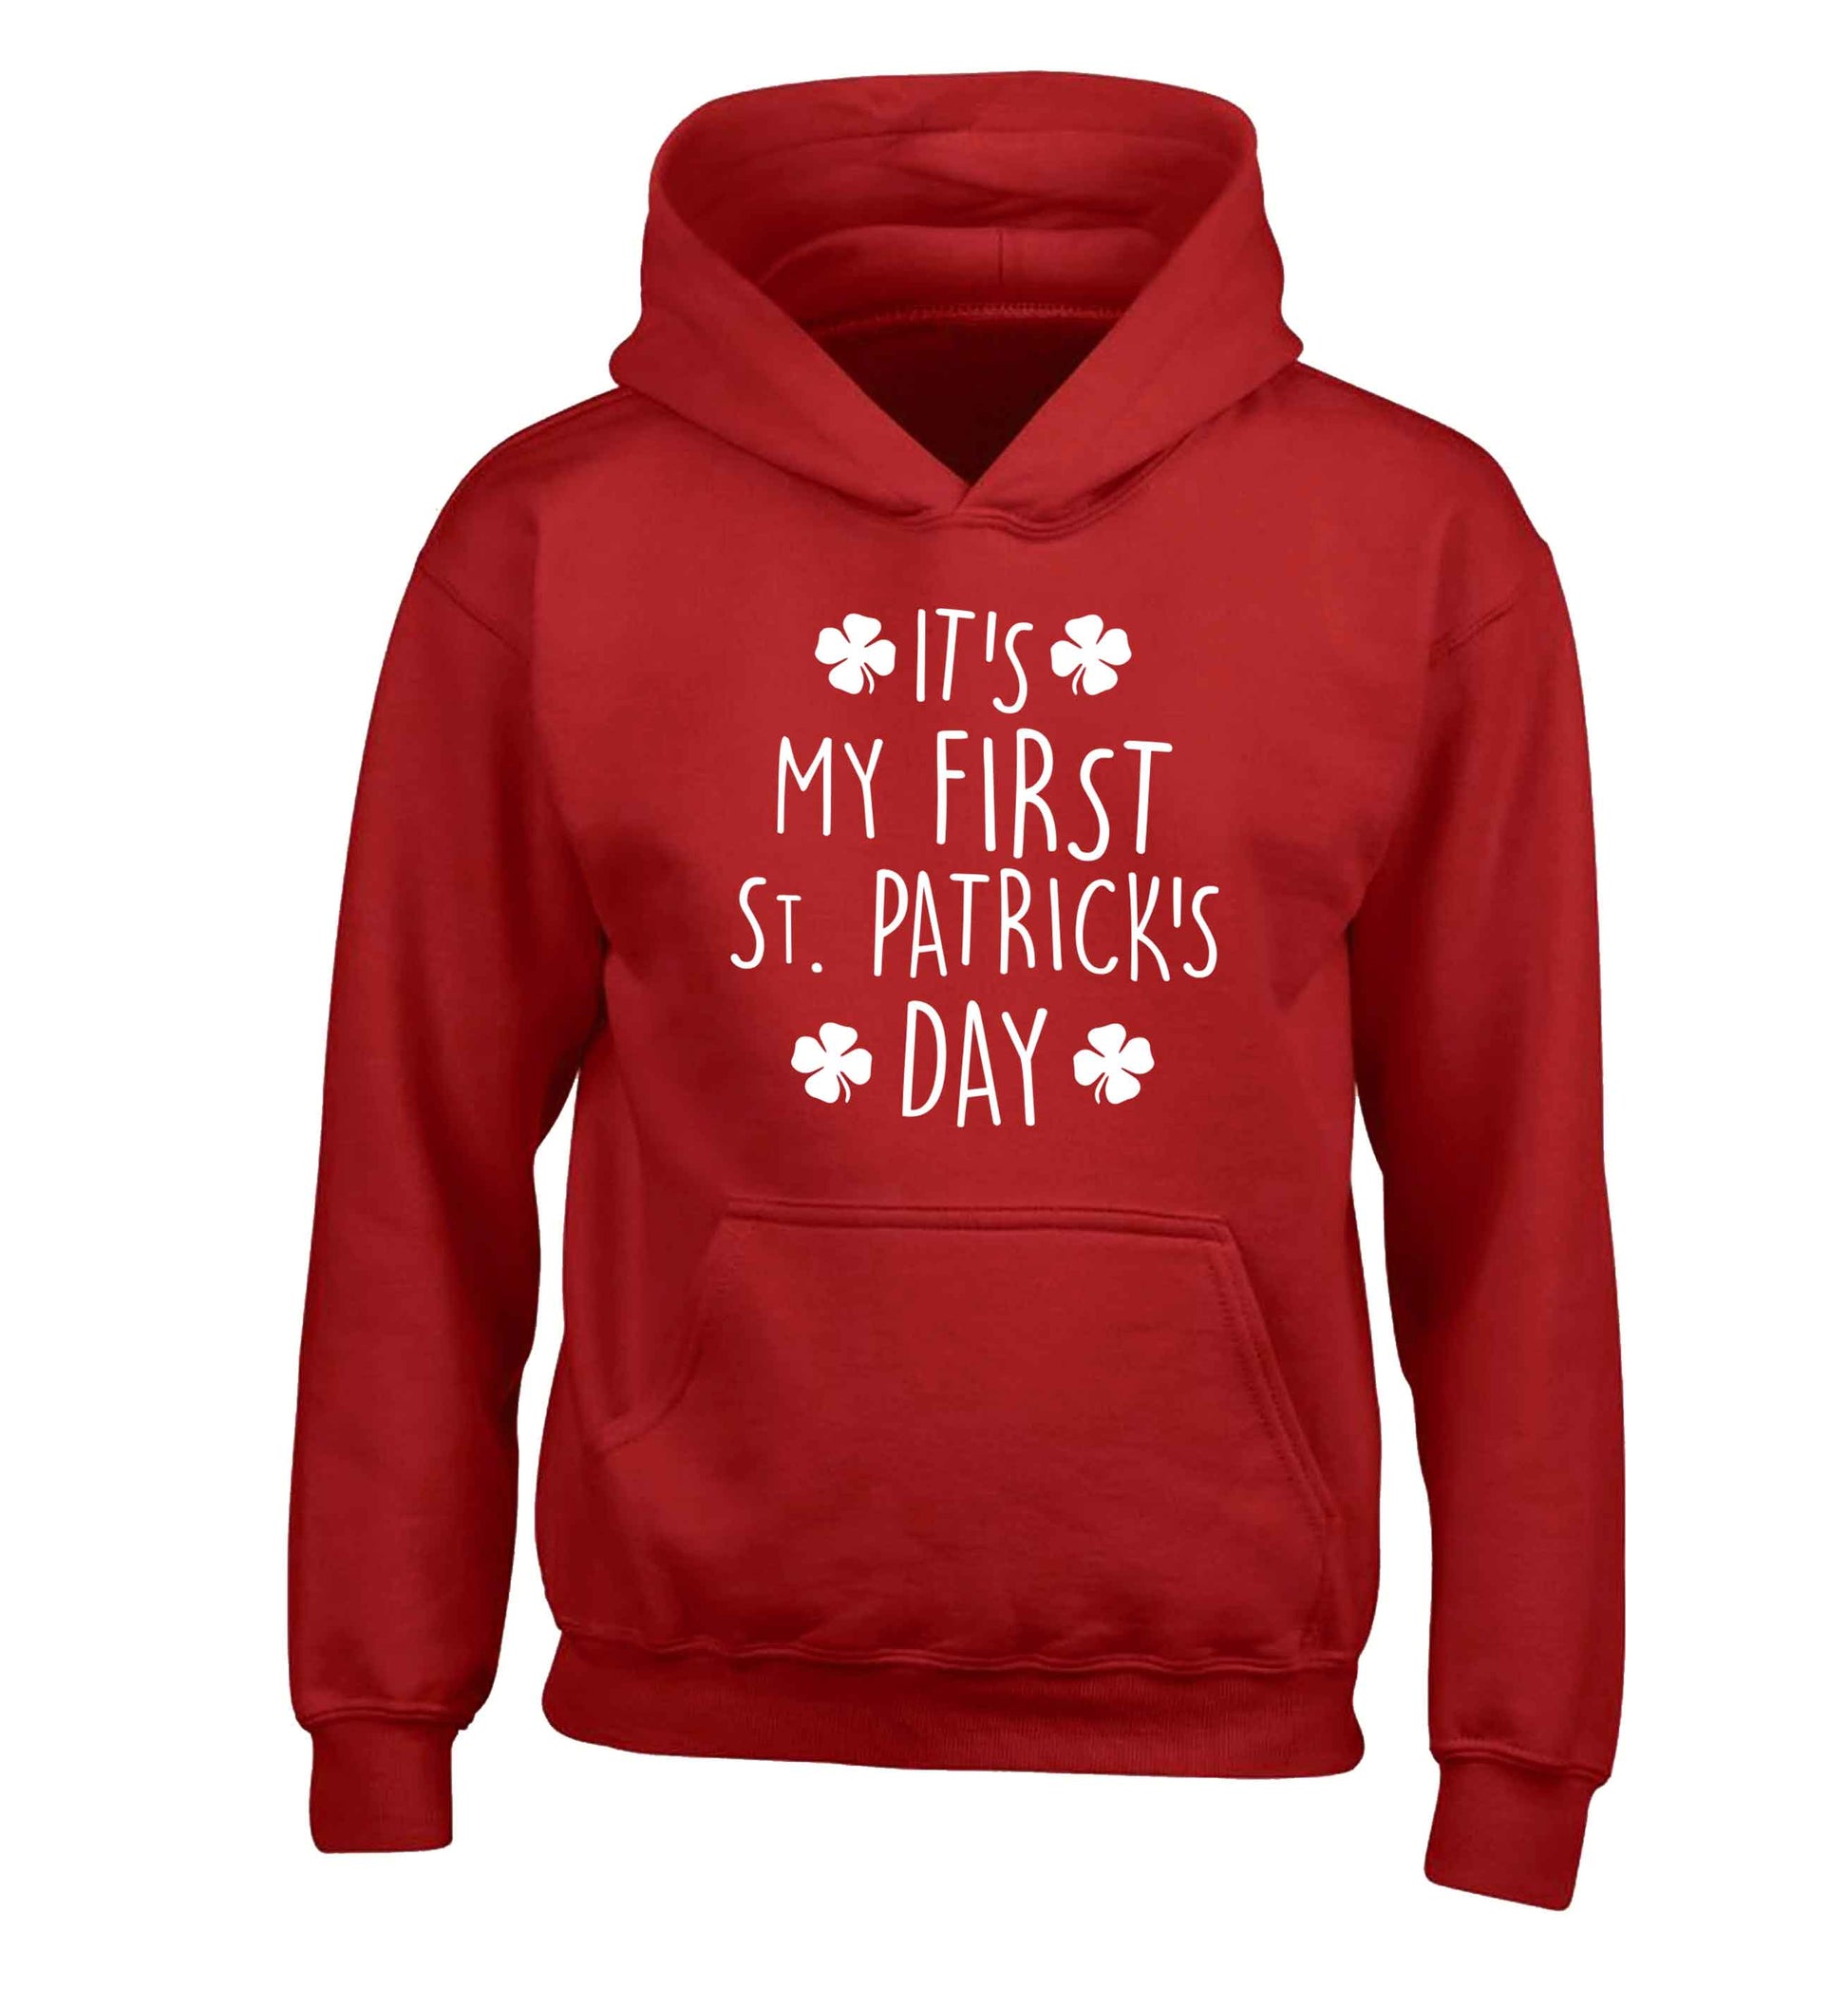 It's my first St.Patrick's day children's red hoodie 12-13 Years